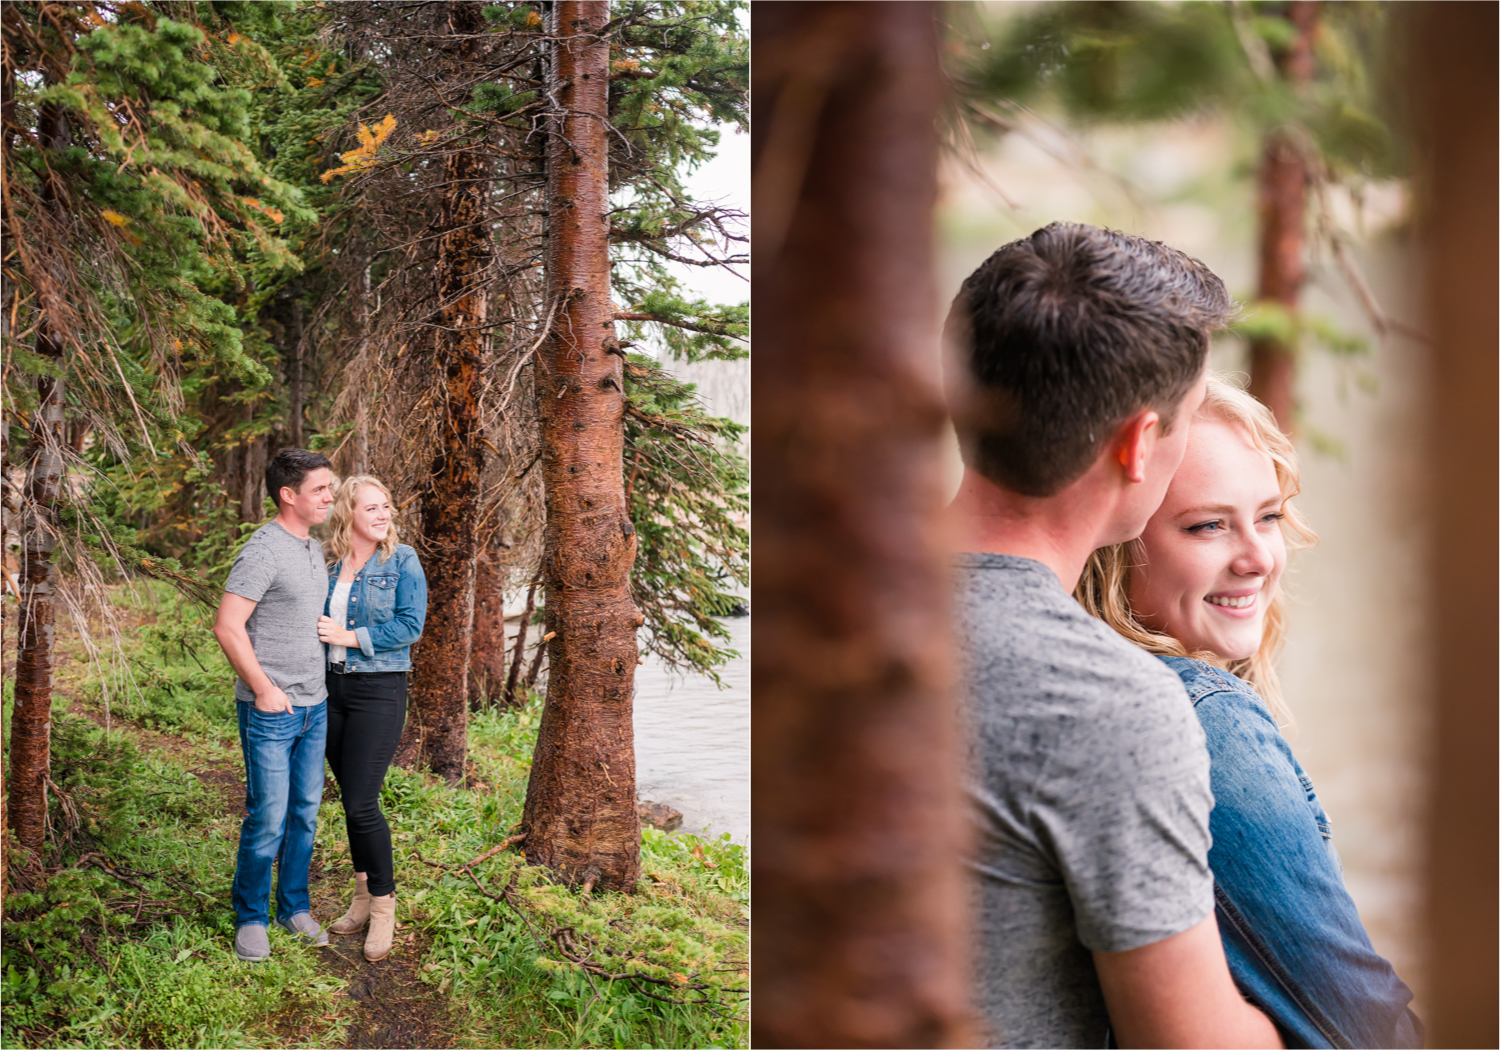 Rainy Summer Engagement at Mirror Lake in Medicine Bow National Park | Britni Girard Photography | Colorado Wedding Photographer and Videographer | Husband Wife photography team | Mountain Engagement